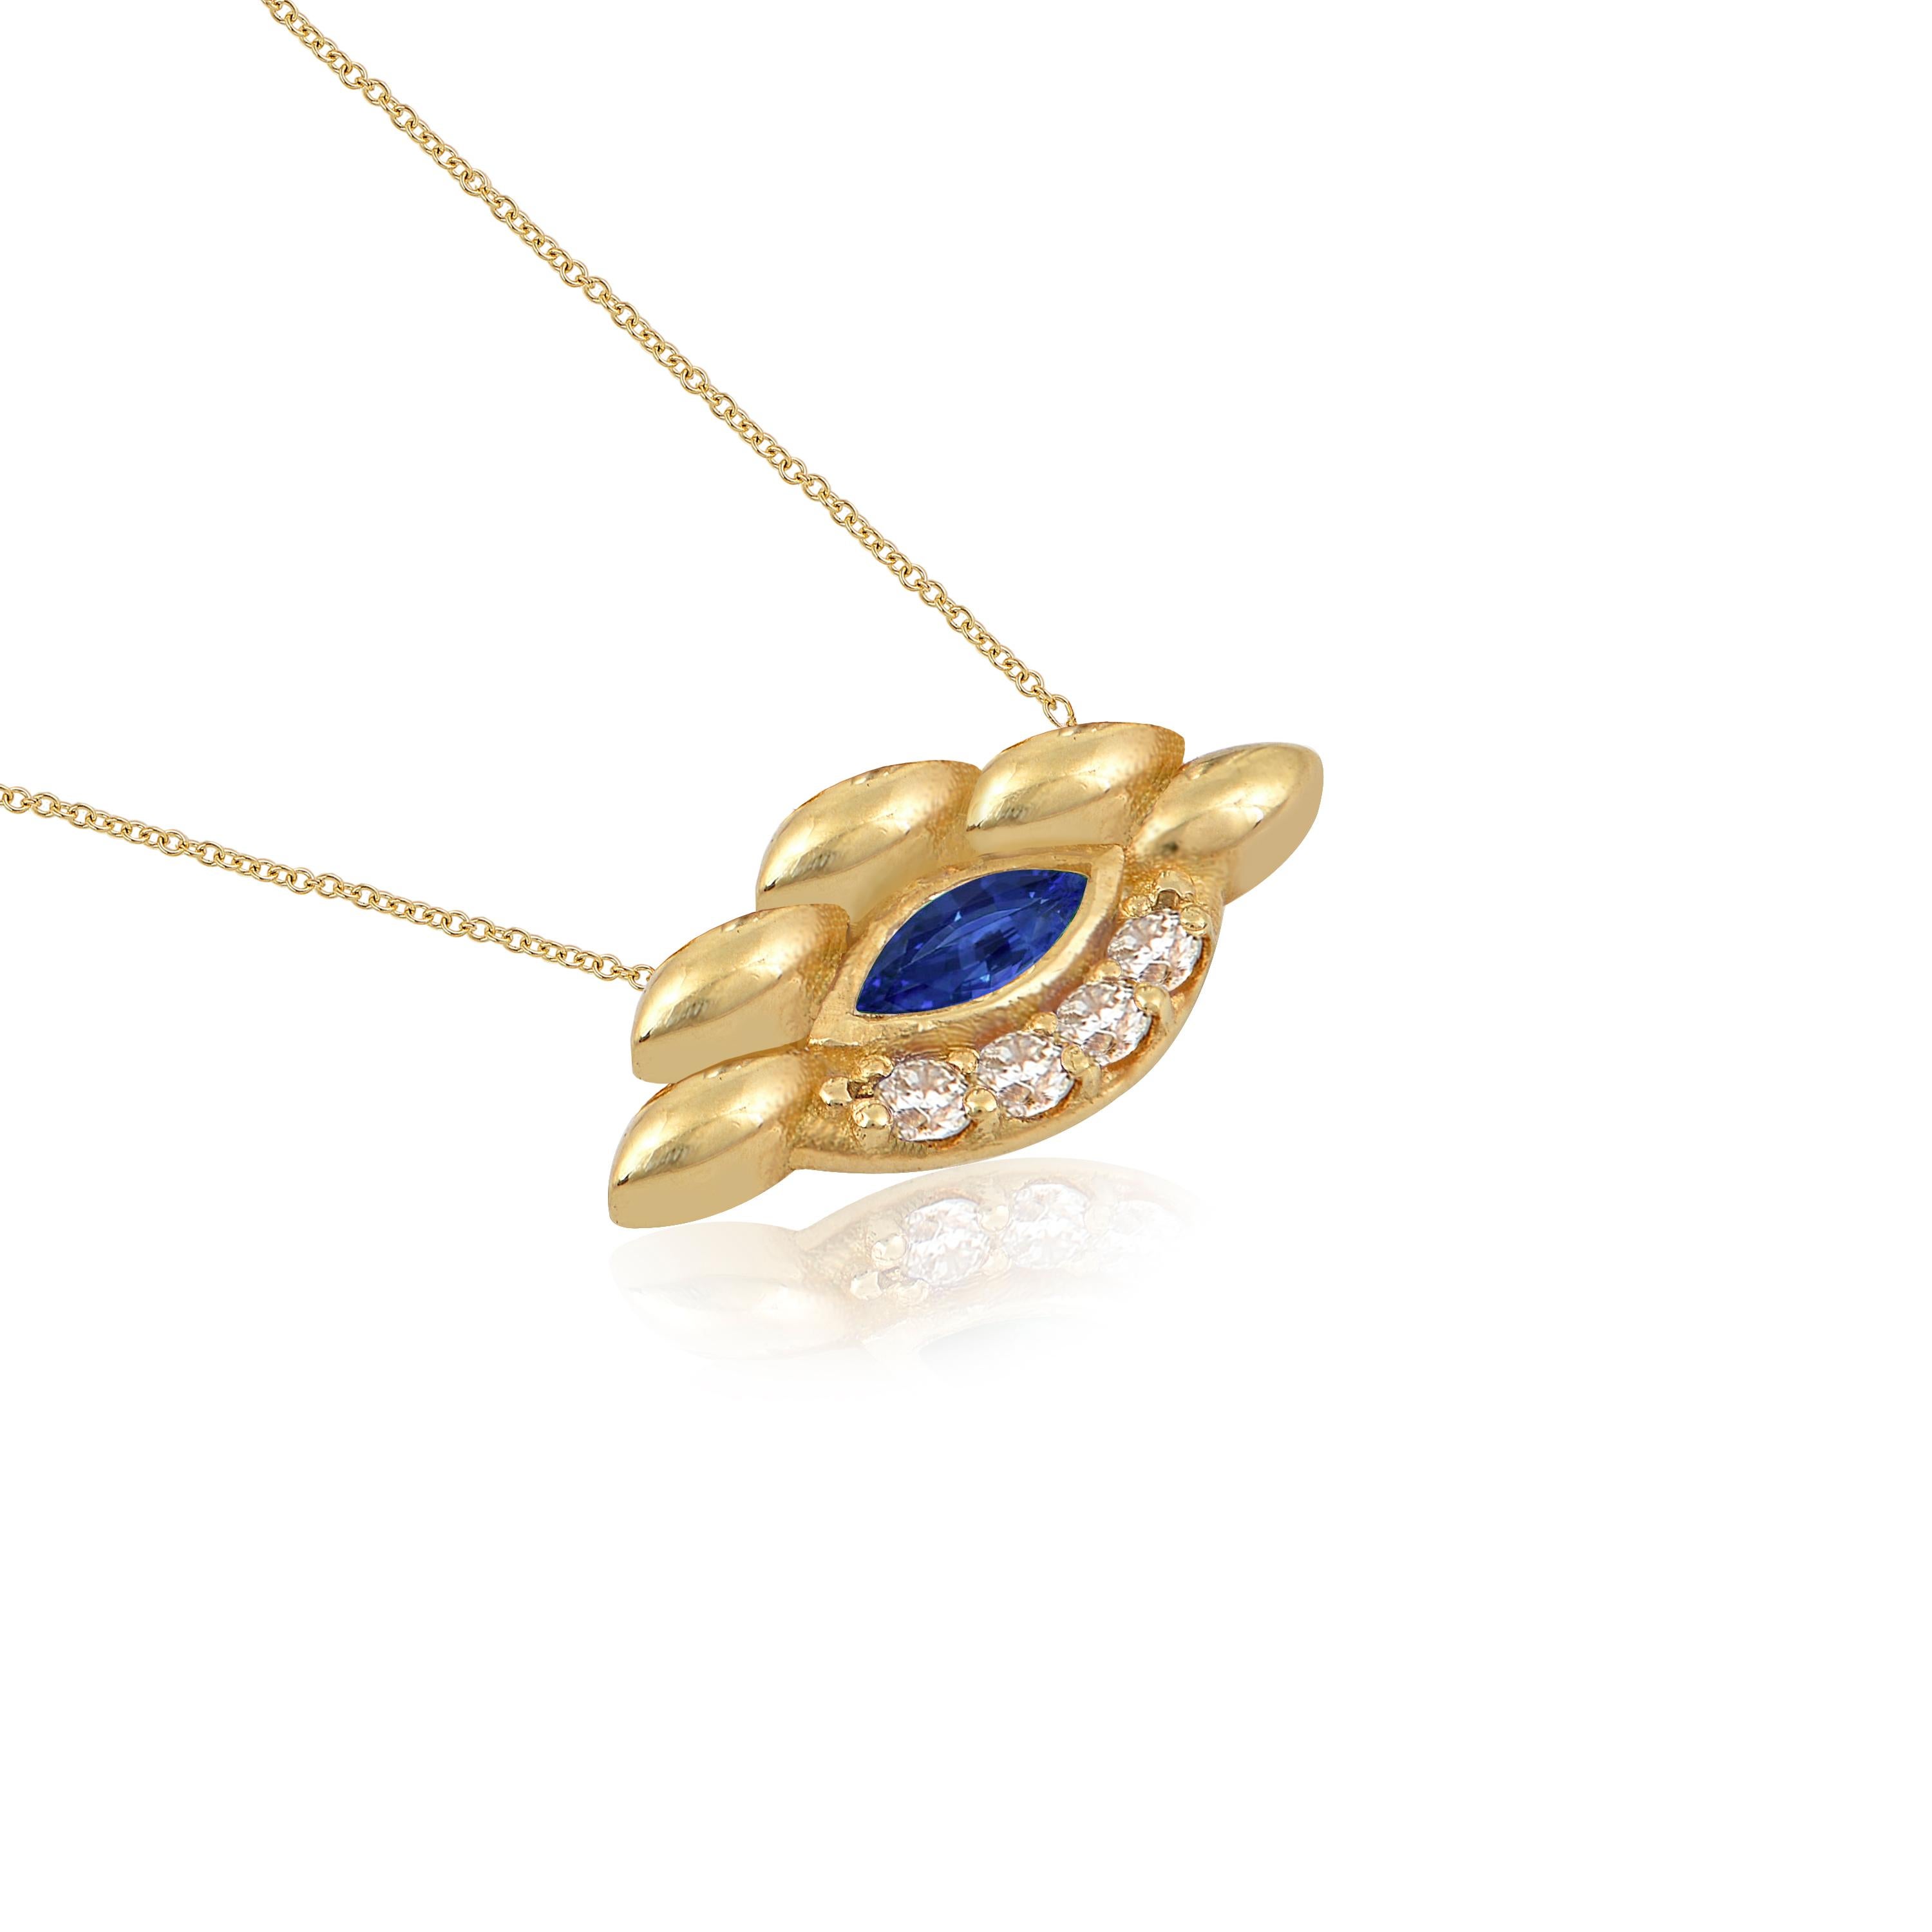 Designer: Alexia Gryllaki

Dimensions: motif 18x9mm, chain 450mm
Weight: approximately 3.8g (inc. chain) 
Barcode: NEX7008SS


Eye pendant in 18 karat yellow gold with a 400mm chain, set with a marquise sapphire approx. 0.30cts and round